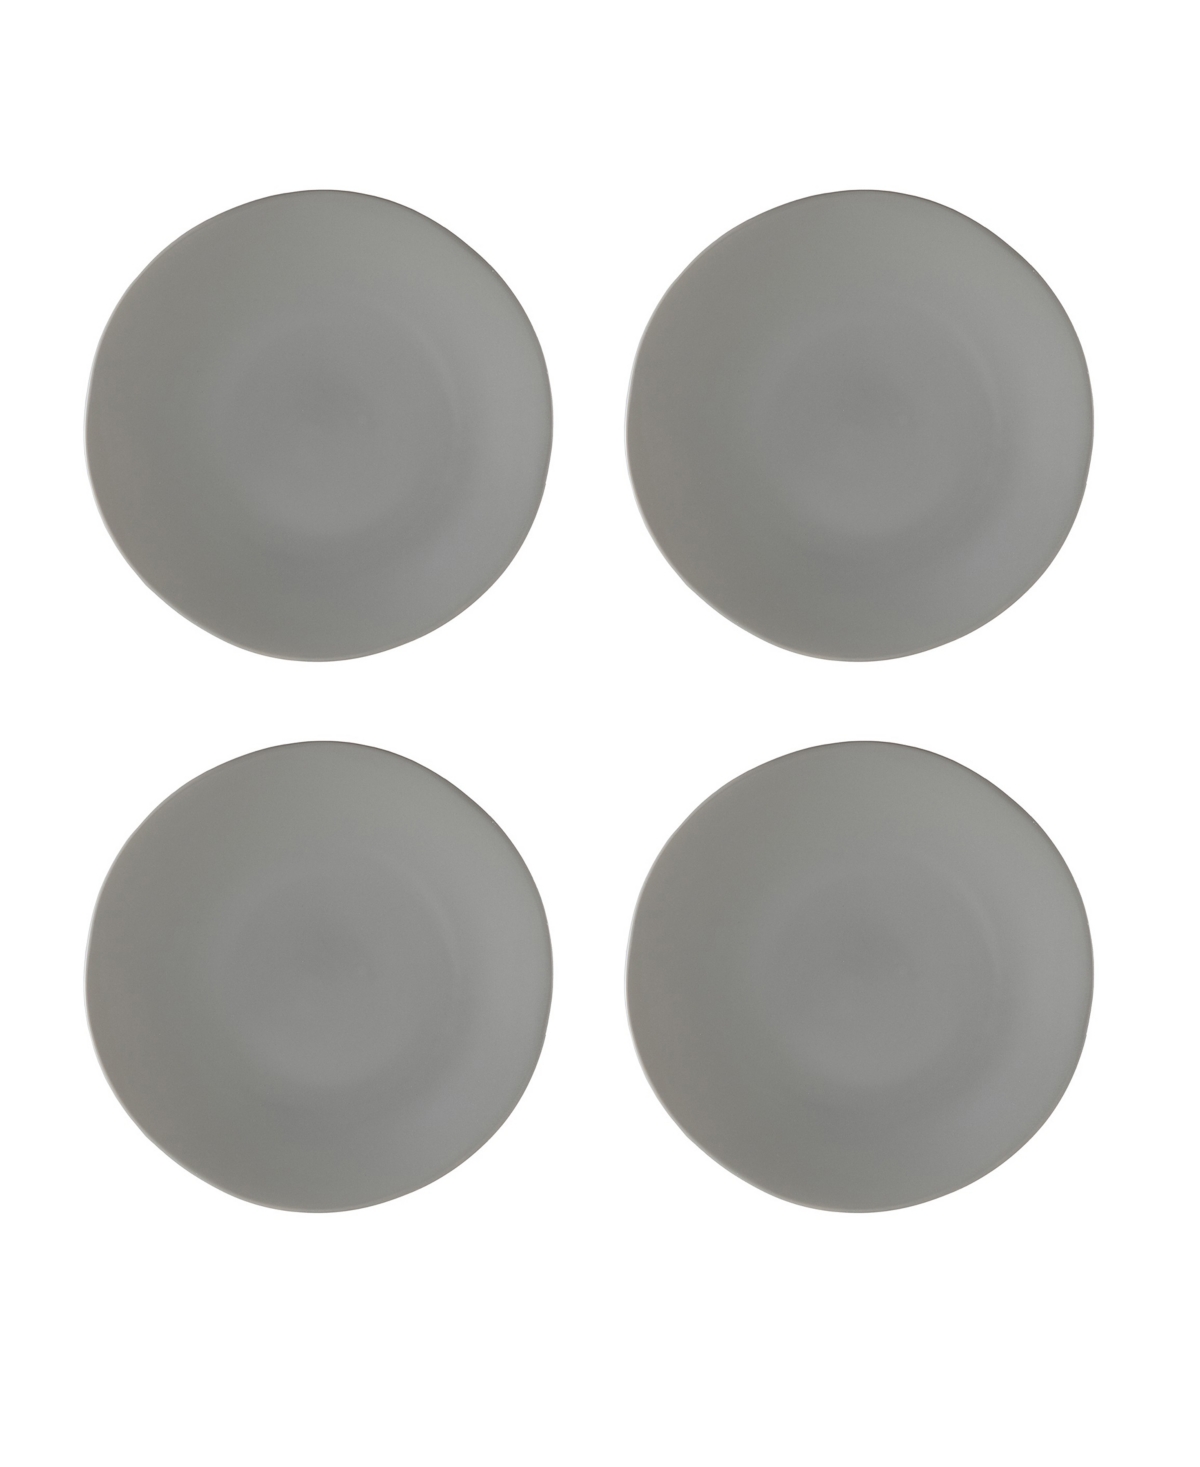 Heirloom 12" Charger Plates, Set of 4 - Blush